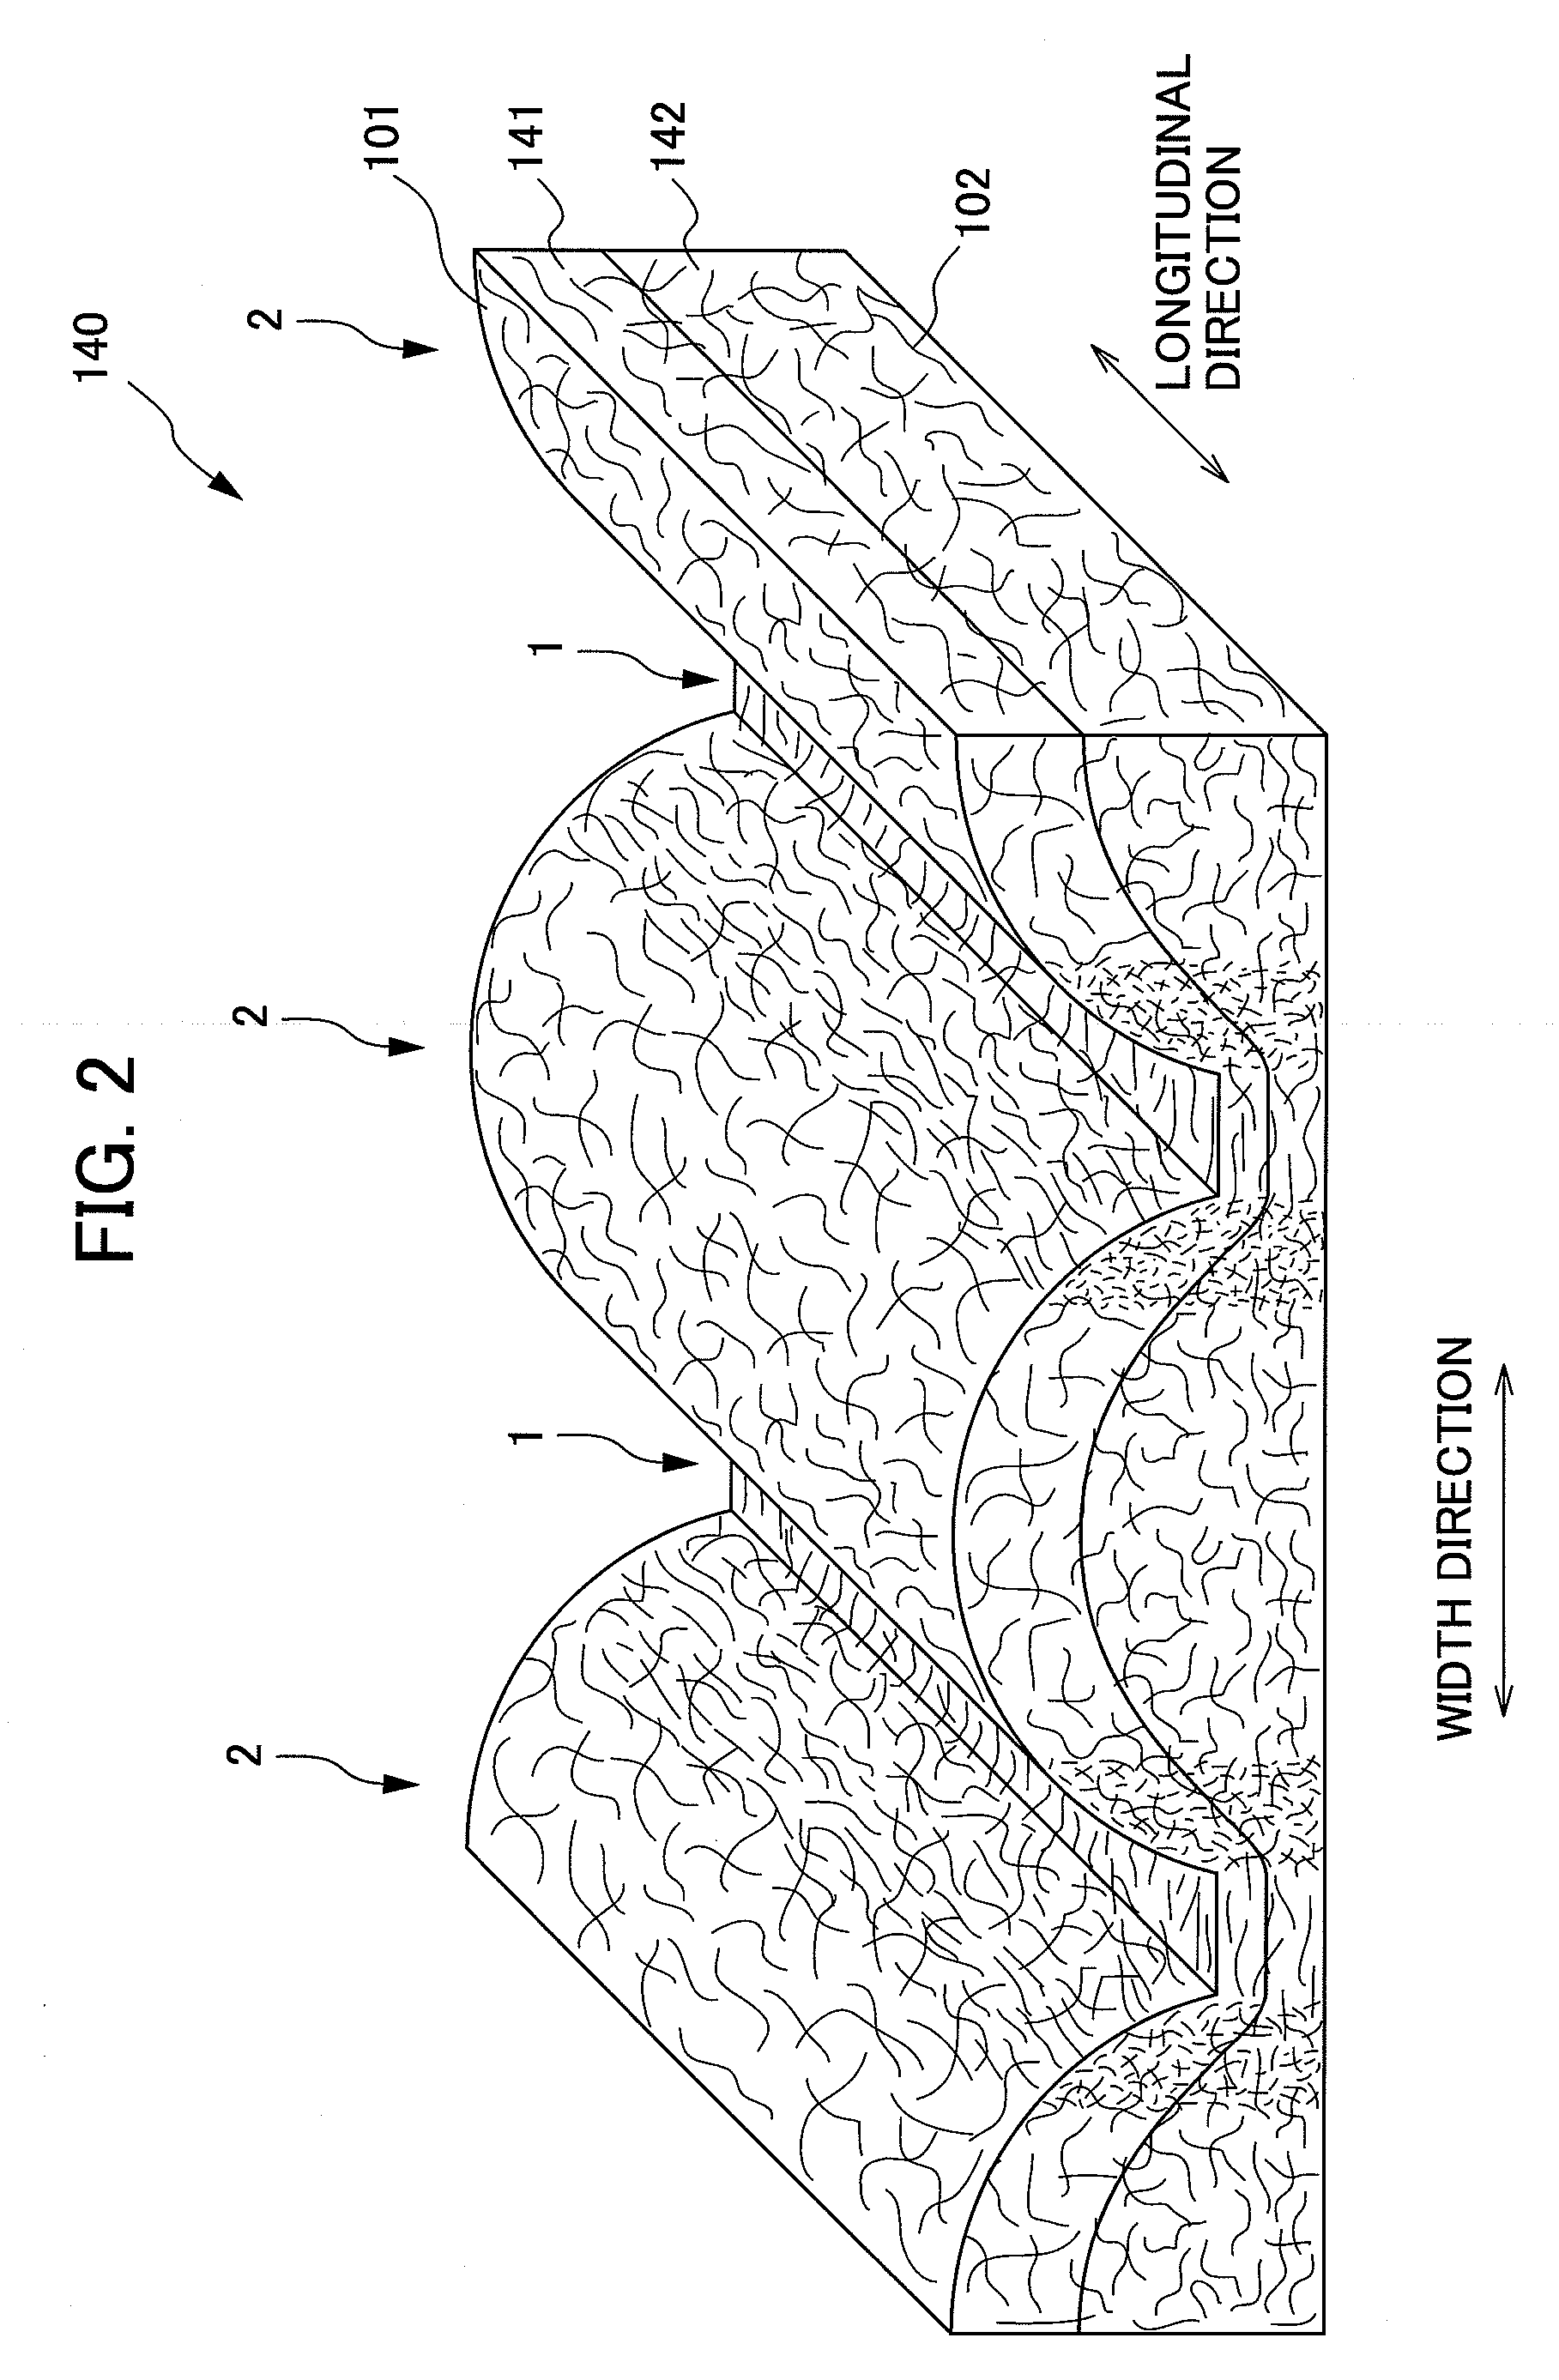 Multilayer nonwoven fabric and method of manufacturing the same